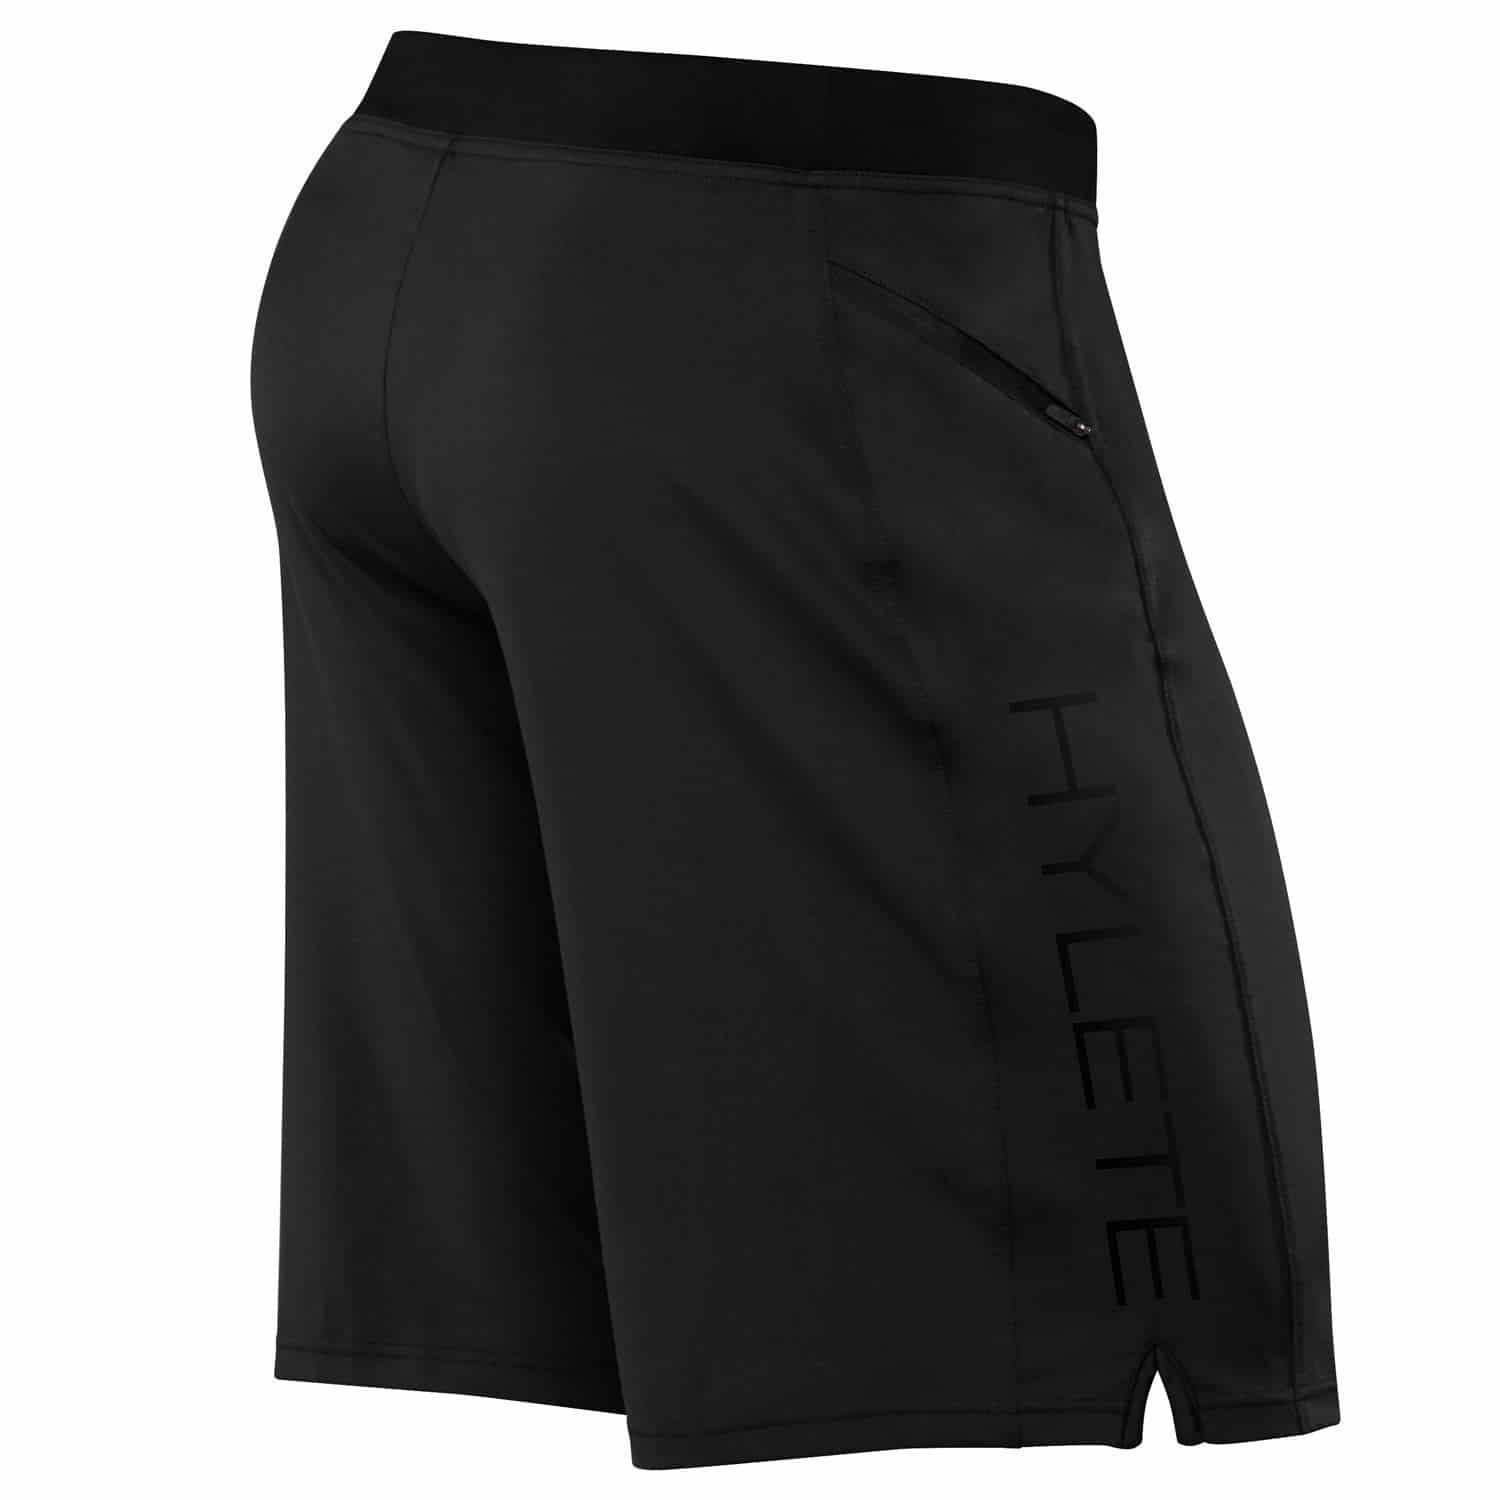 Men's Workout Shorts - Vertex II Shorts from Hylete - Cross Train Clothes